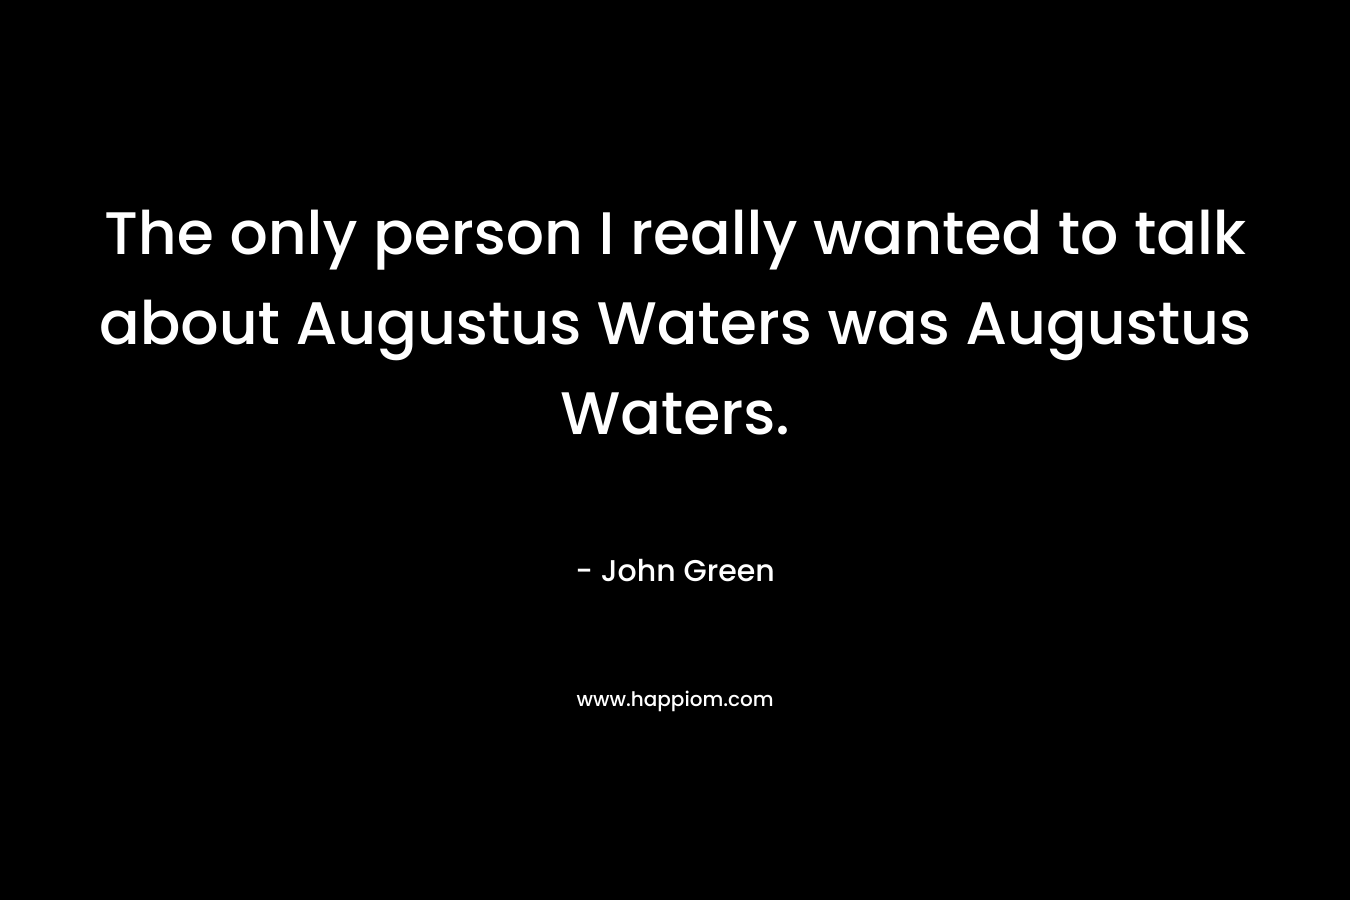 The only person I really wanted to talk about Augustus Waters was Augustus Waters.